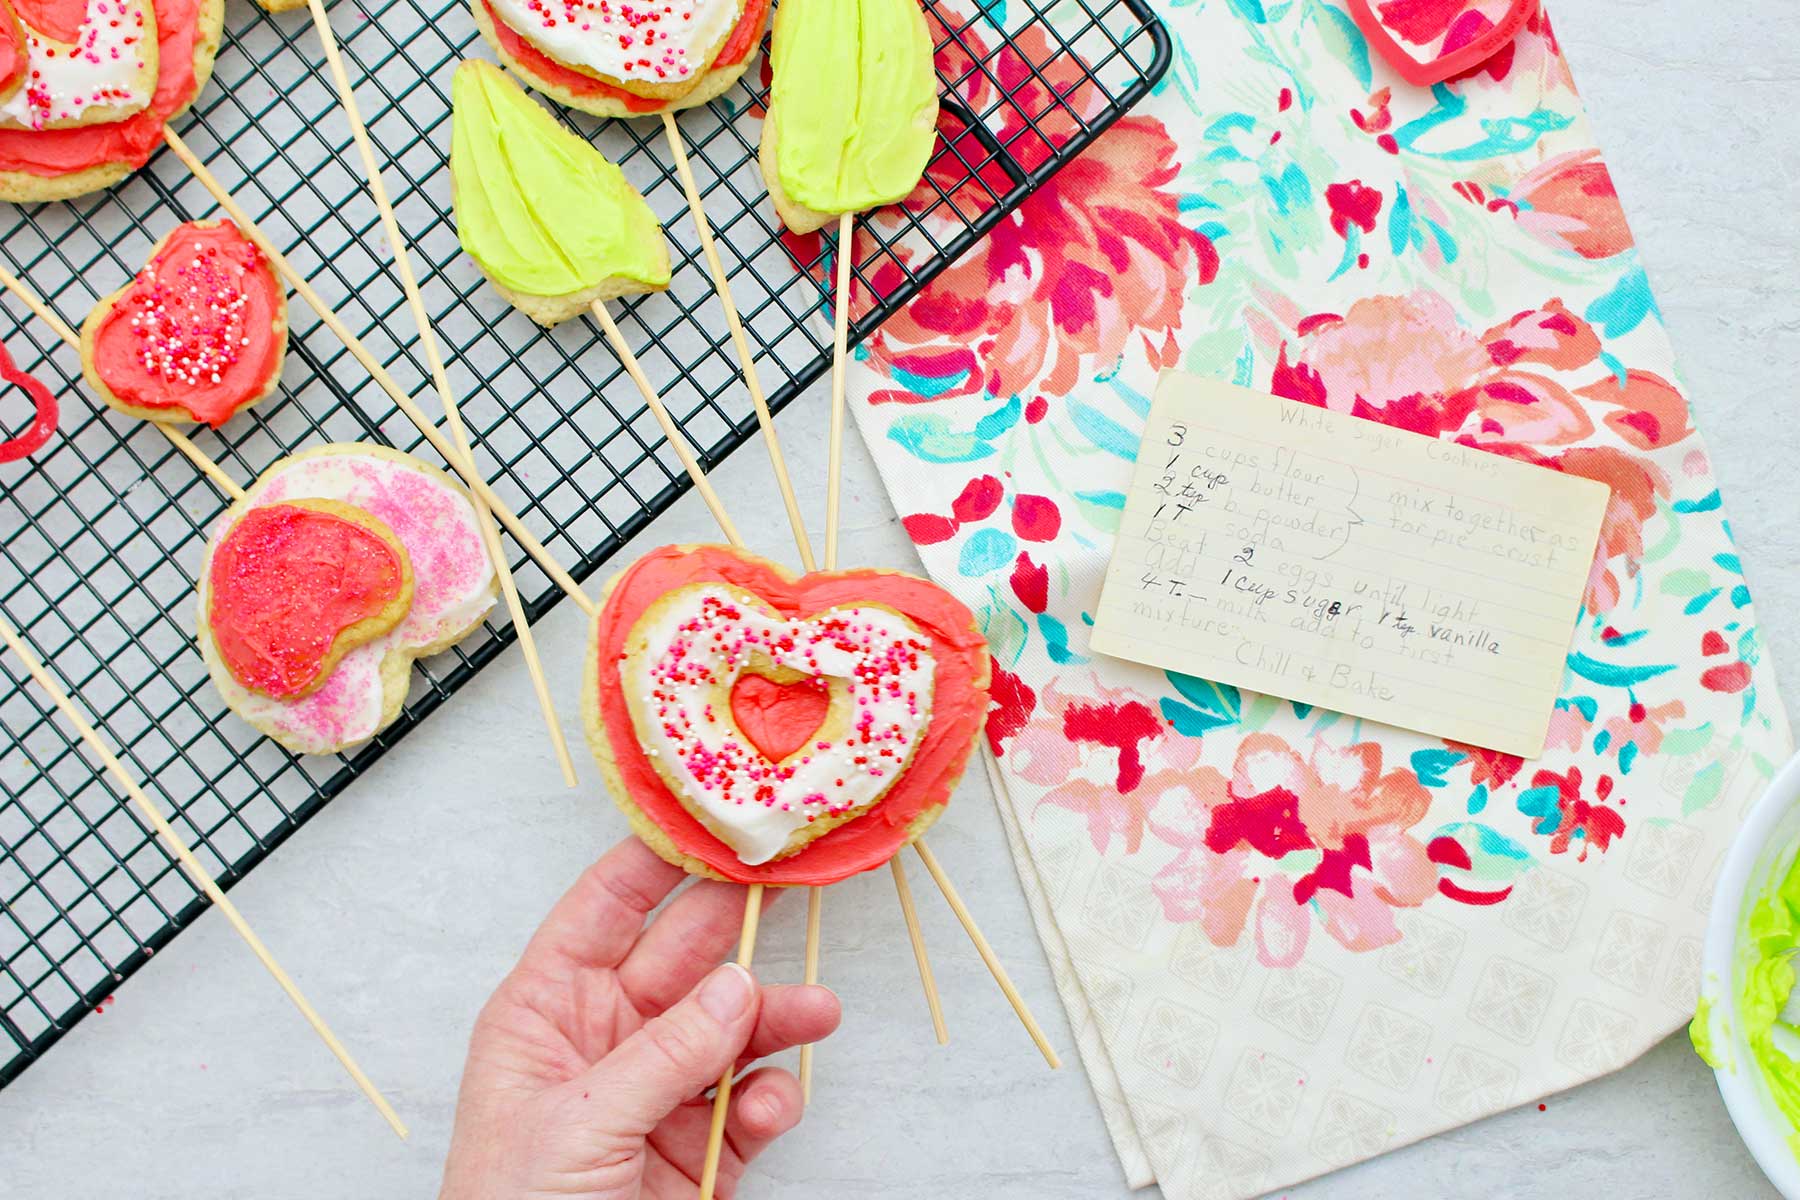 Hand holding iced sugar cookie on a stick with other completed cookies in the background.